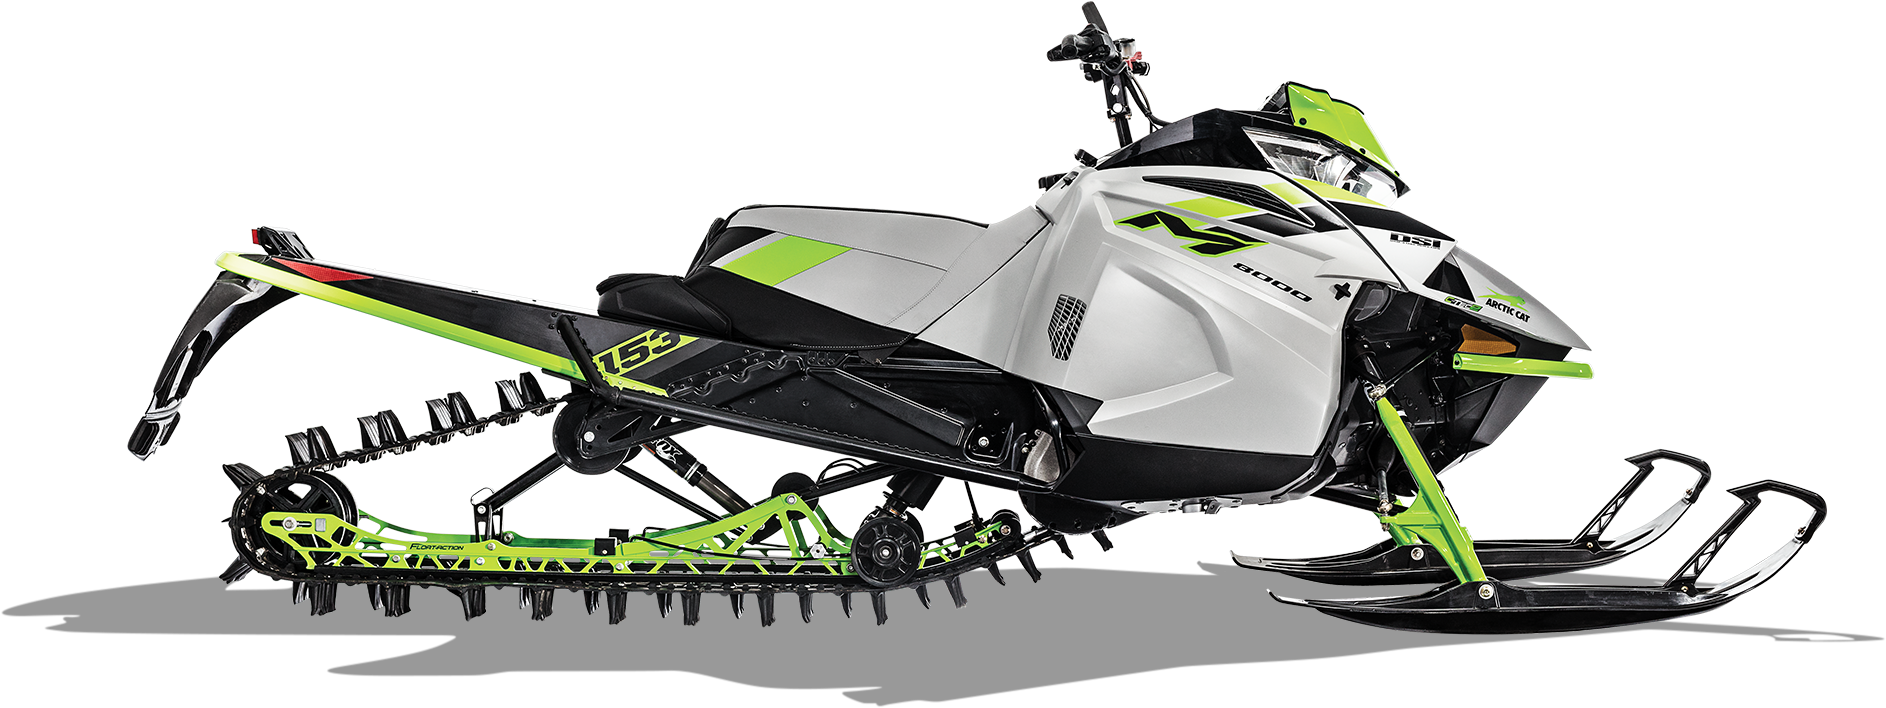 2018 Early Release M 8000 Sno Pro - Arctic Cat Model 2018 (2000x966), Png Download